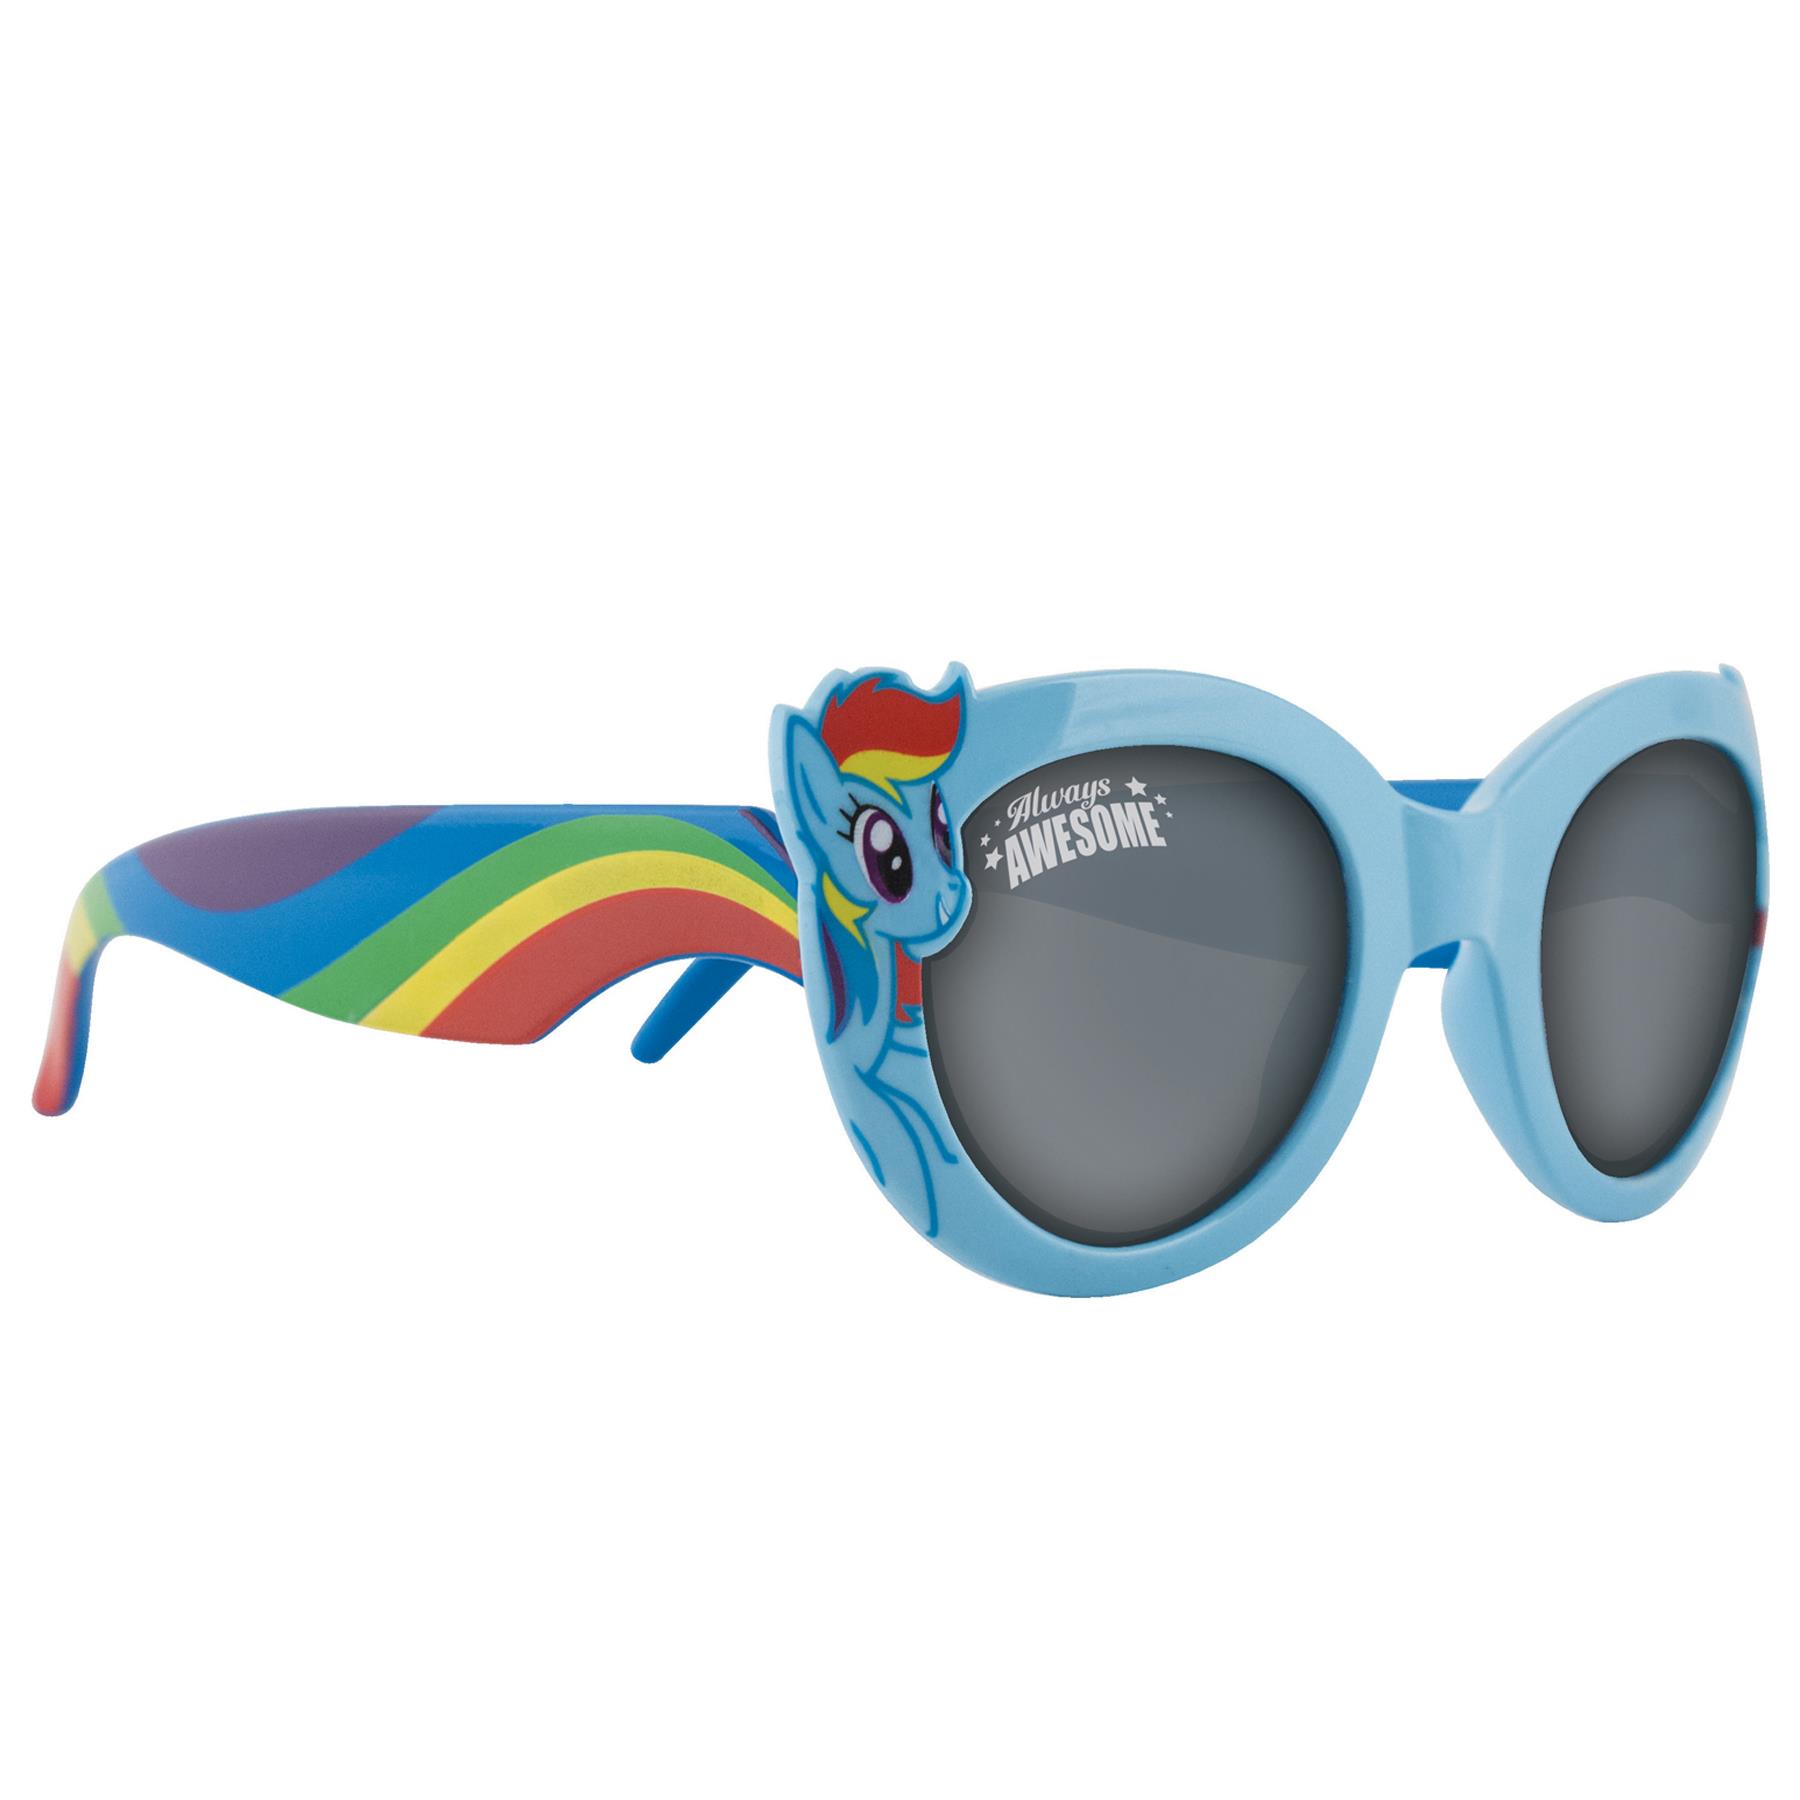 Children's TV Character Sunglasses UV protection for Holiday - My Little Pony PONY4